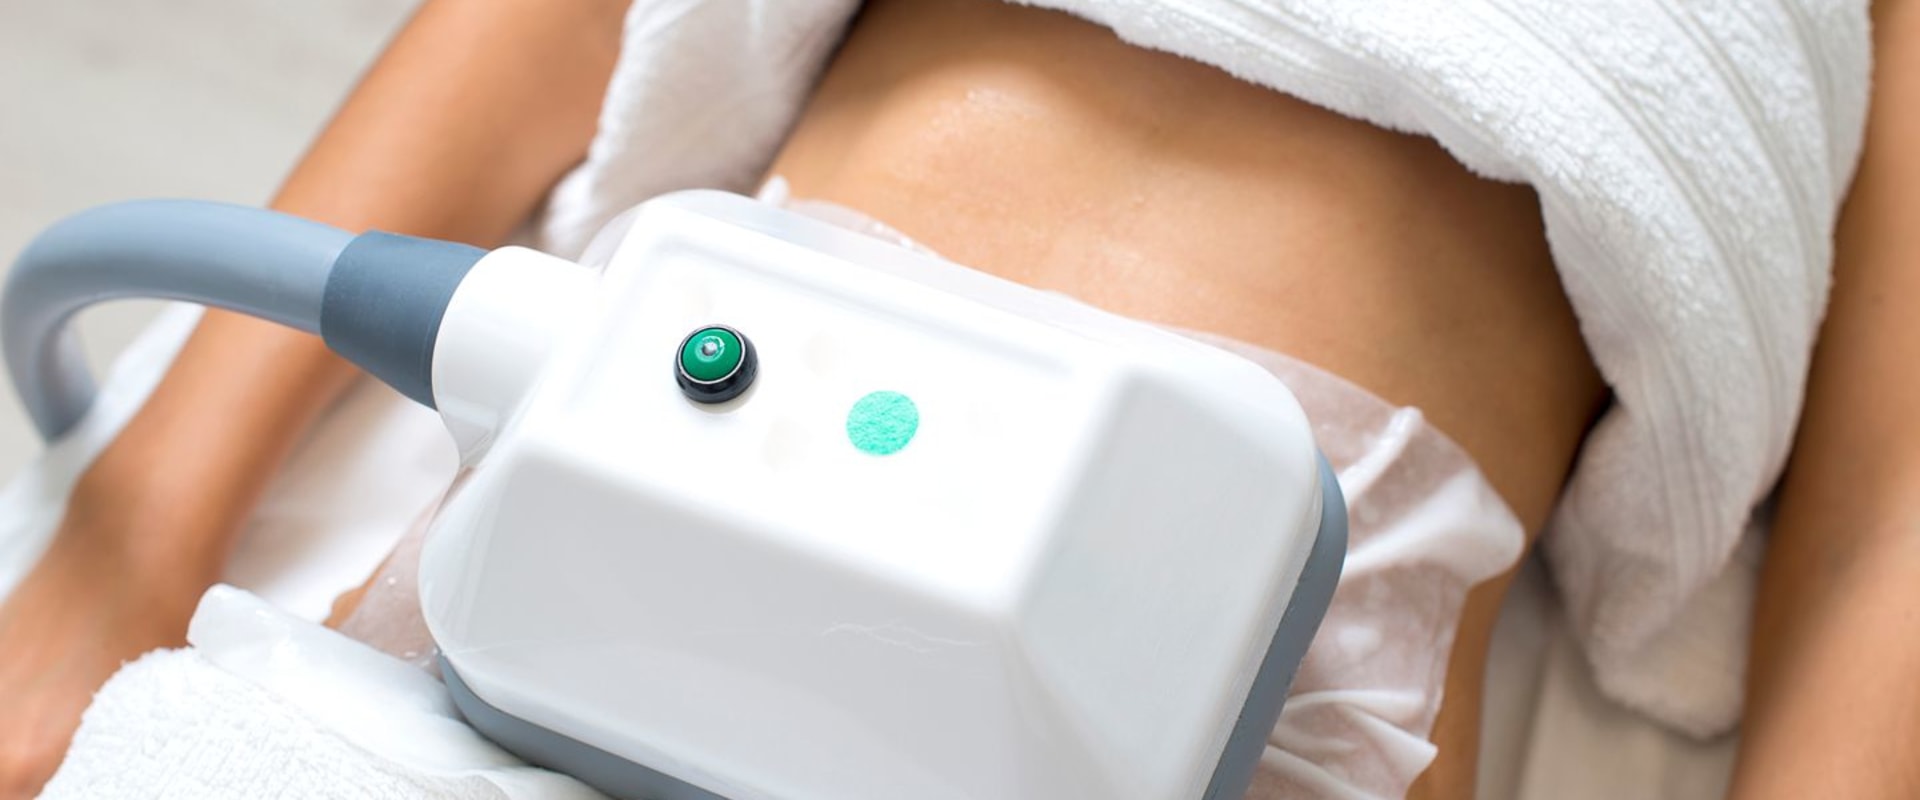 What is the Best Non-Invasive Fat Reduction Treatment for Me?